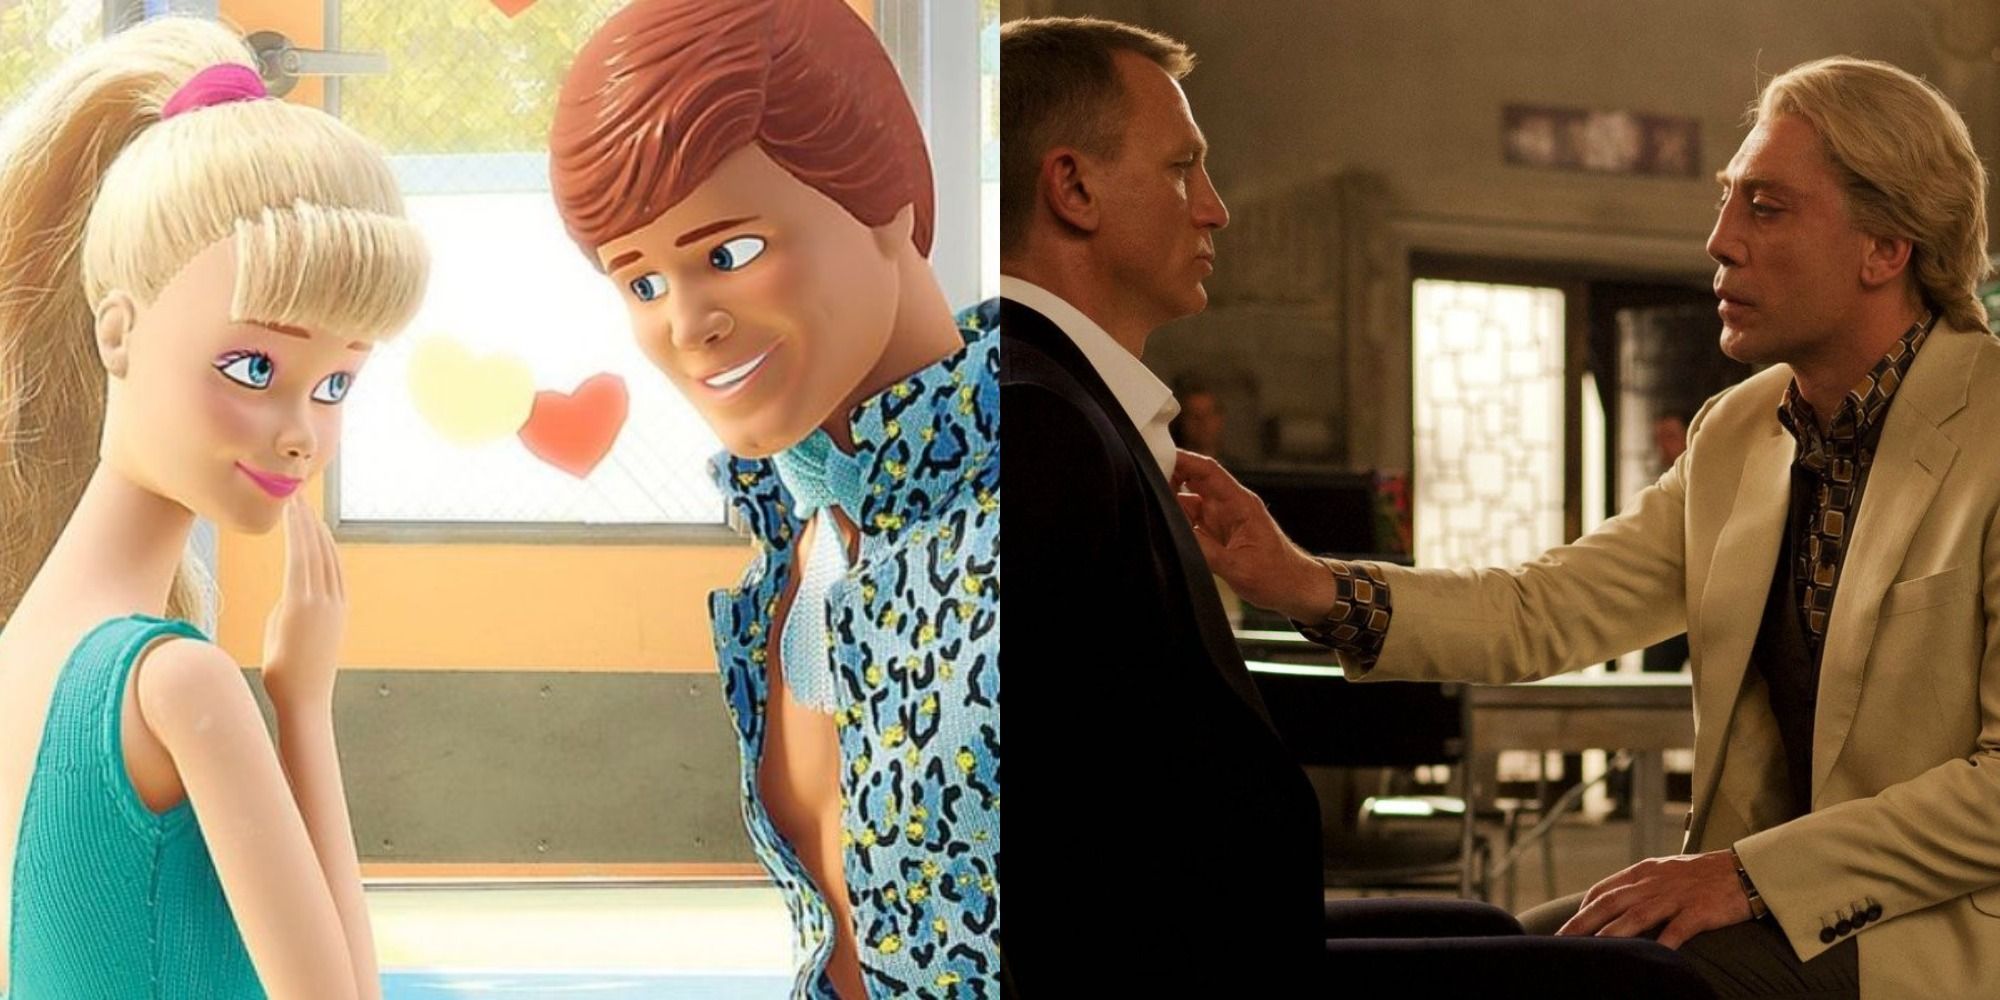 Barbie & Ken in Toy Story 3 split with Bond and Silva in Skyfall